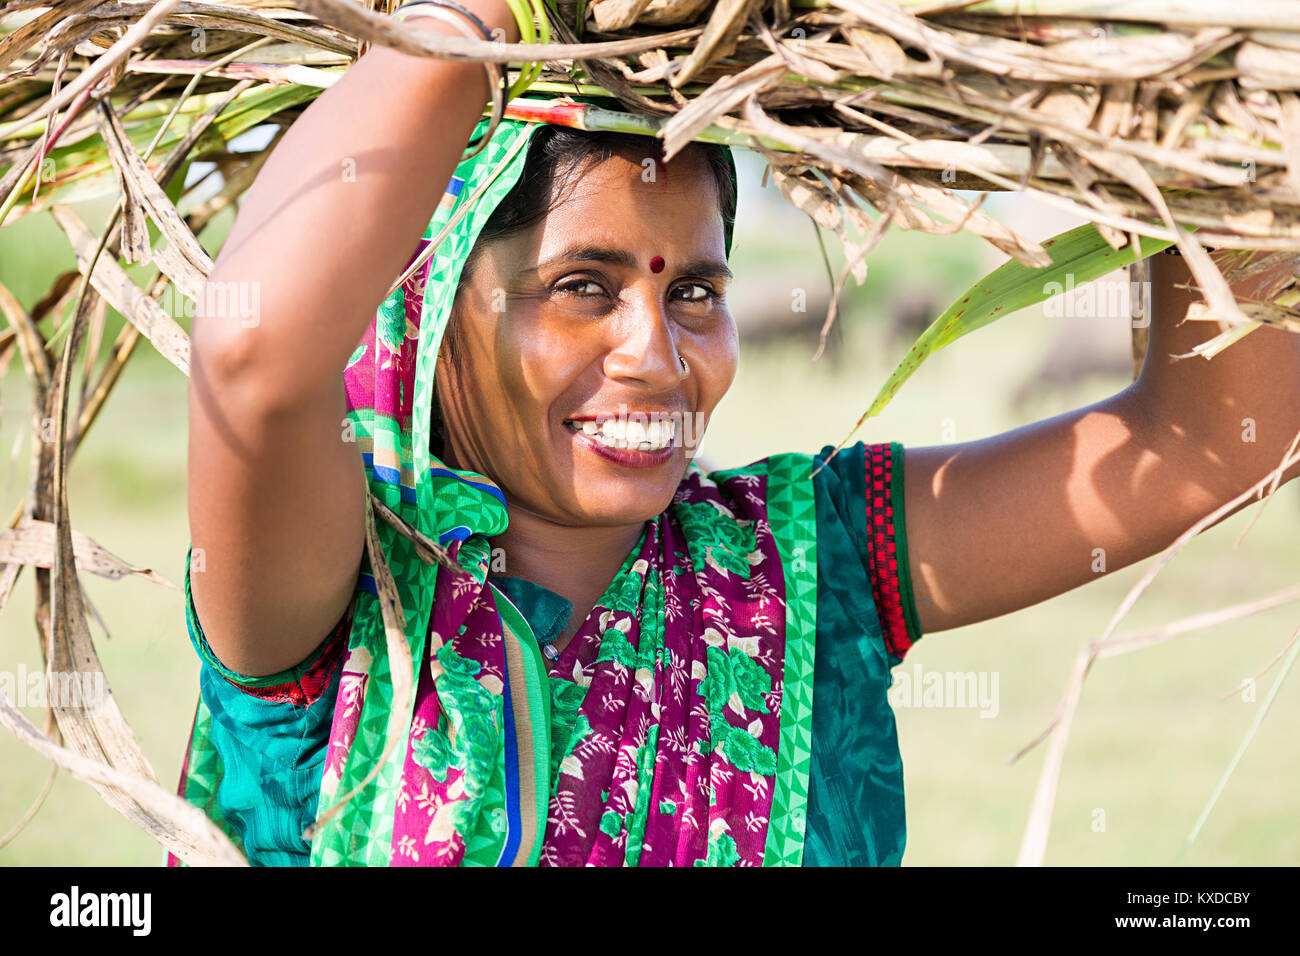 1 Indian Rural Villager Lady Carrying Bunch Weed On Head Stock Photo